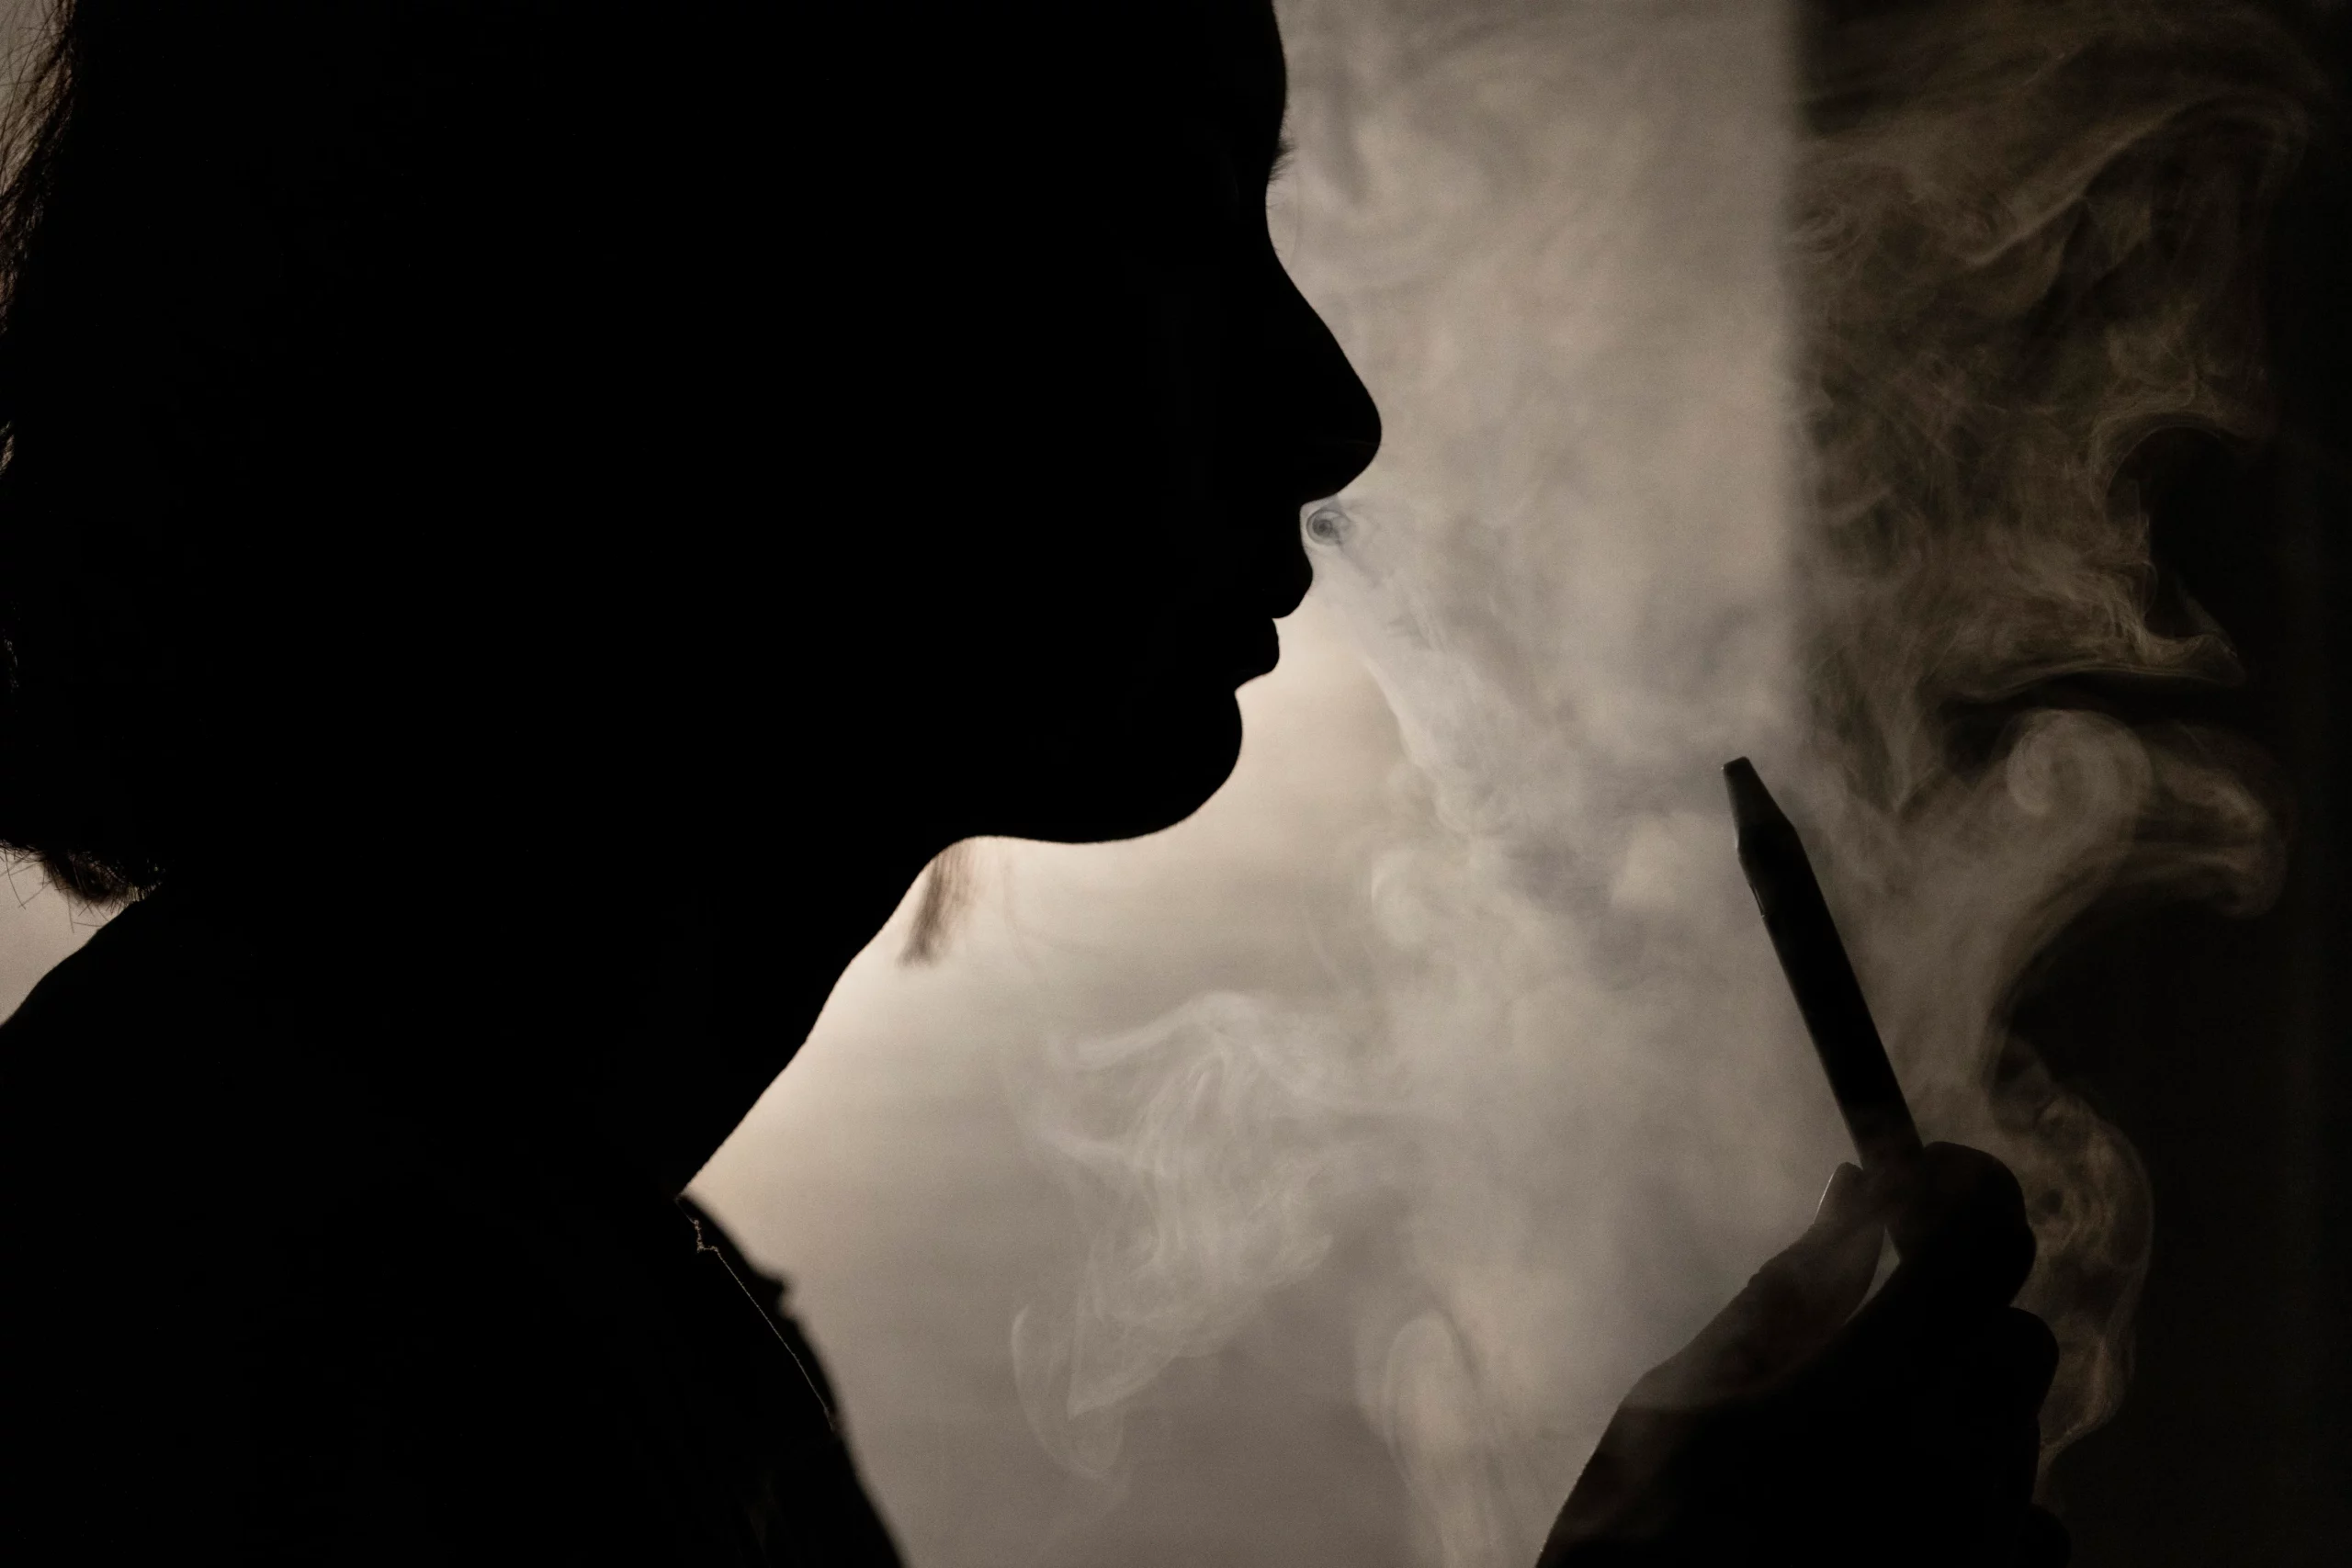 Illinois Implements Public Vaping Ban: A Turning Point for Public Health